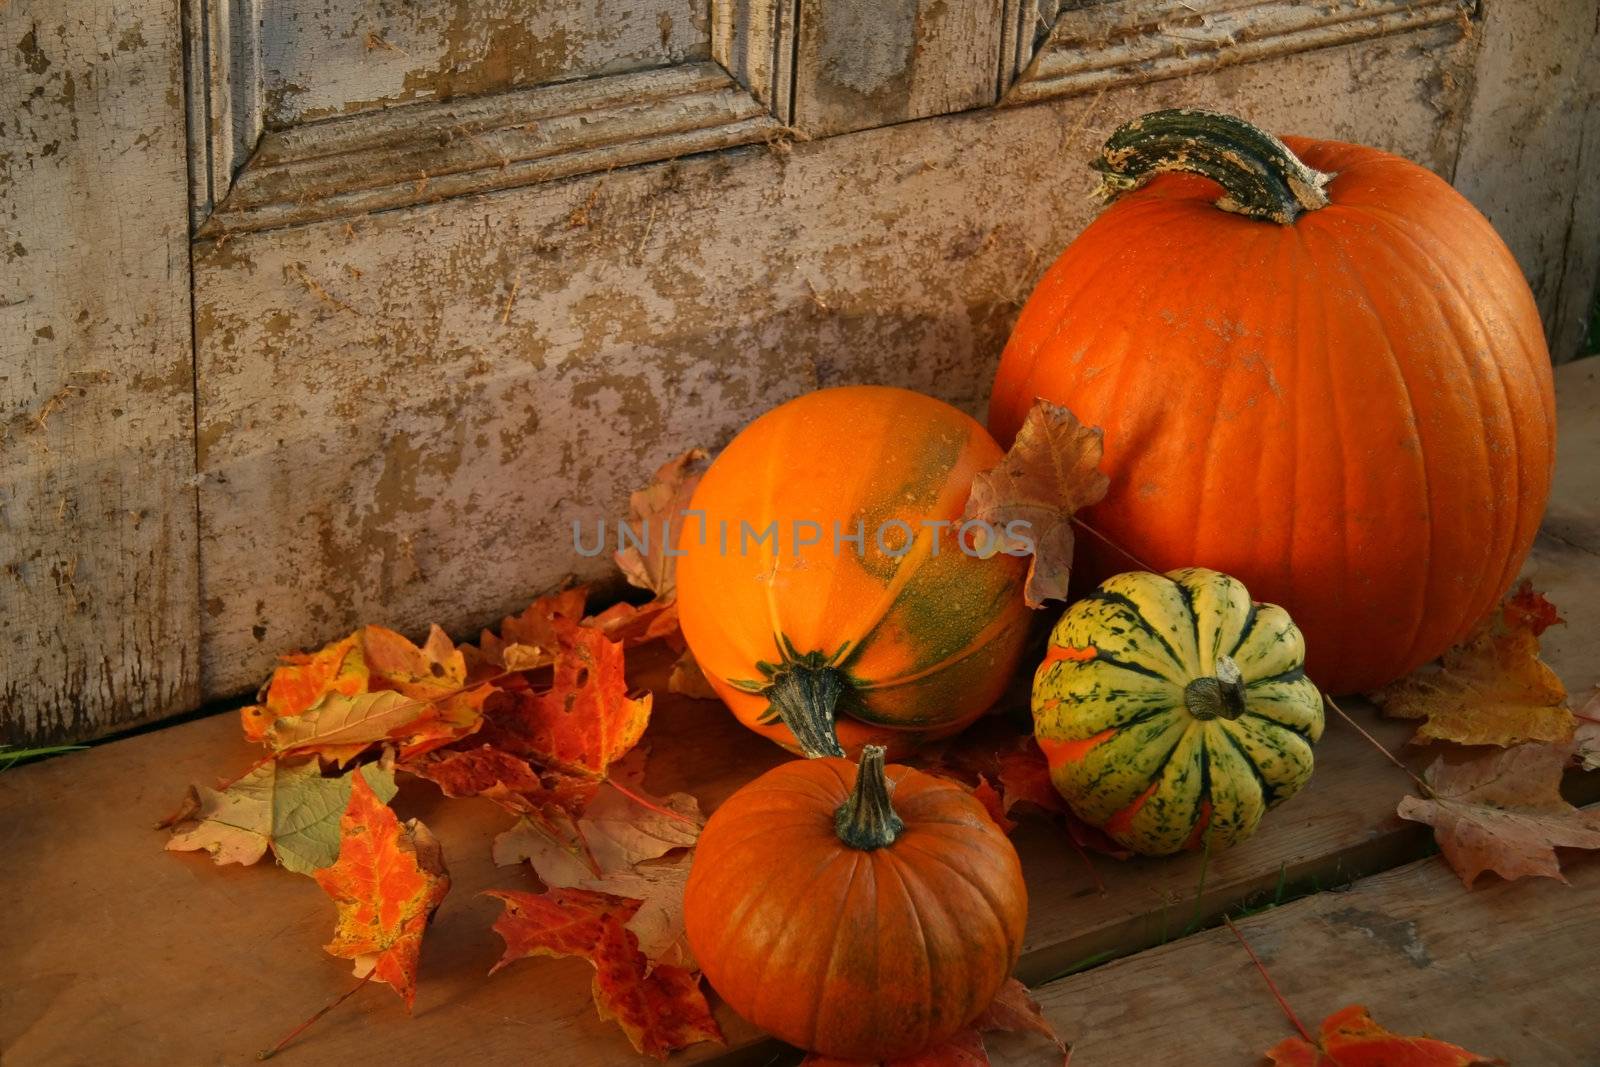 Pumpkins and gourds at the door  by Sandralise